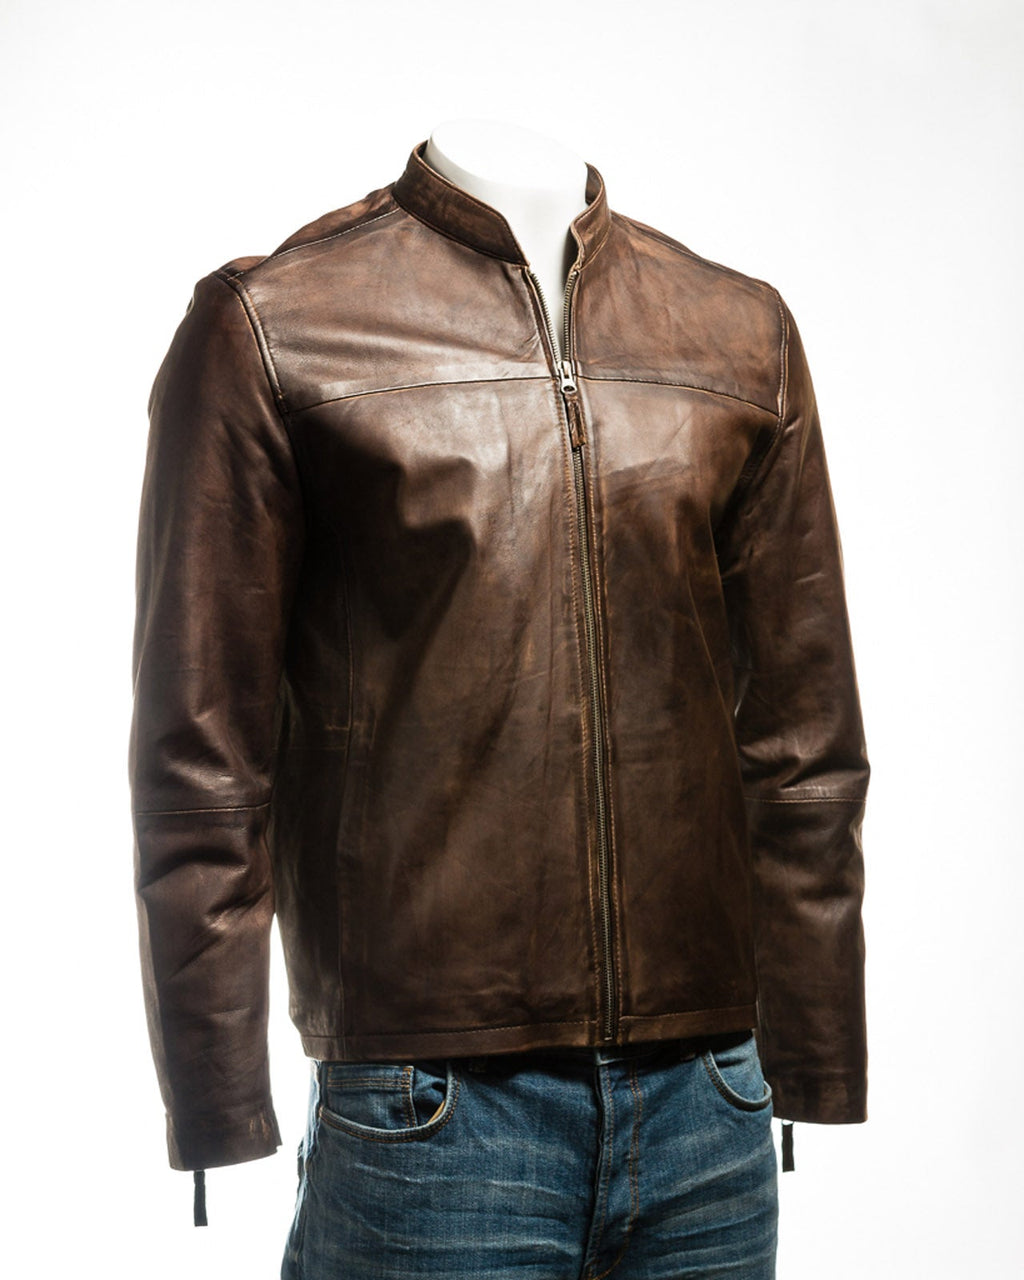 Men's Antique Brown Simple Collarless Zipped Leather Jacket: Mario